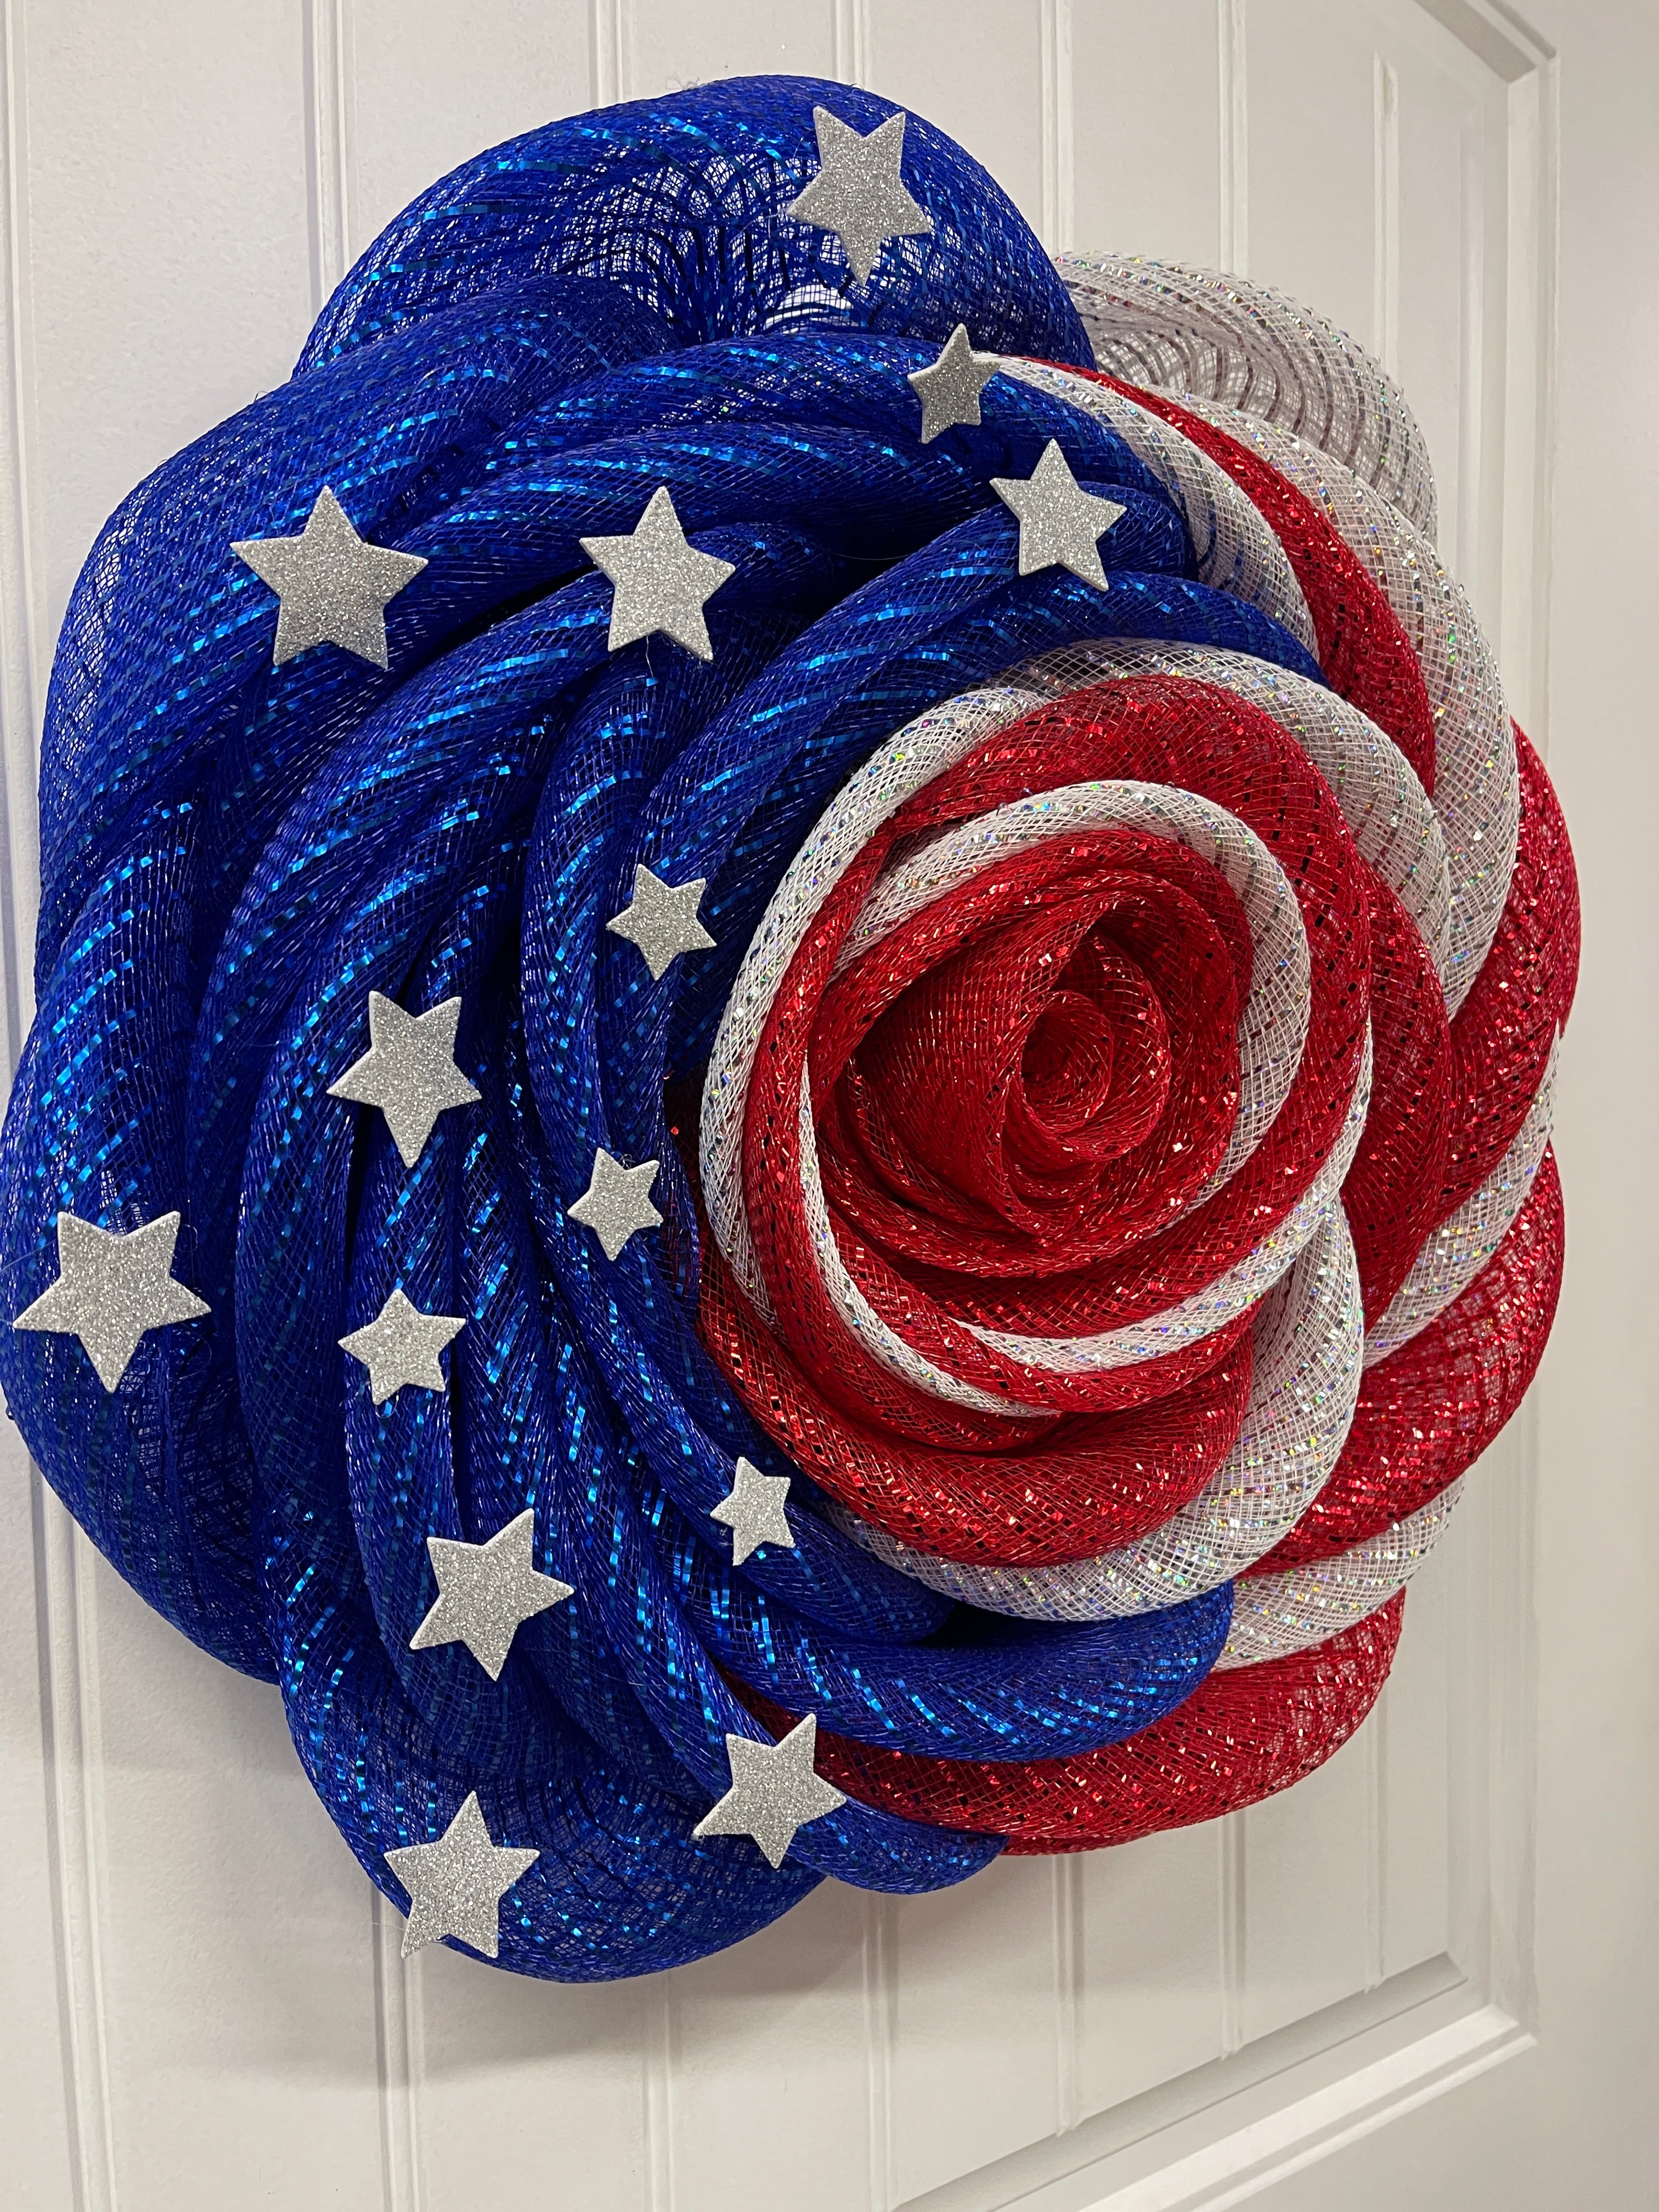 Left Side View of Red, White and Blue Deco Mesh Rose Flower Wreath with Silver Stars on a White Door